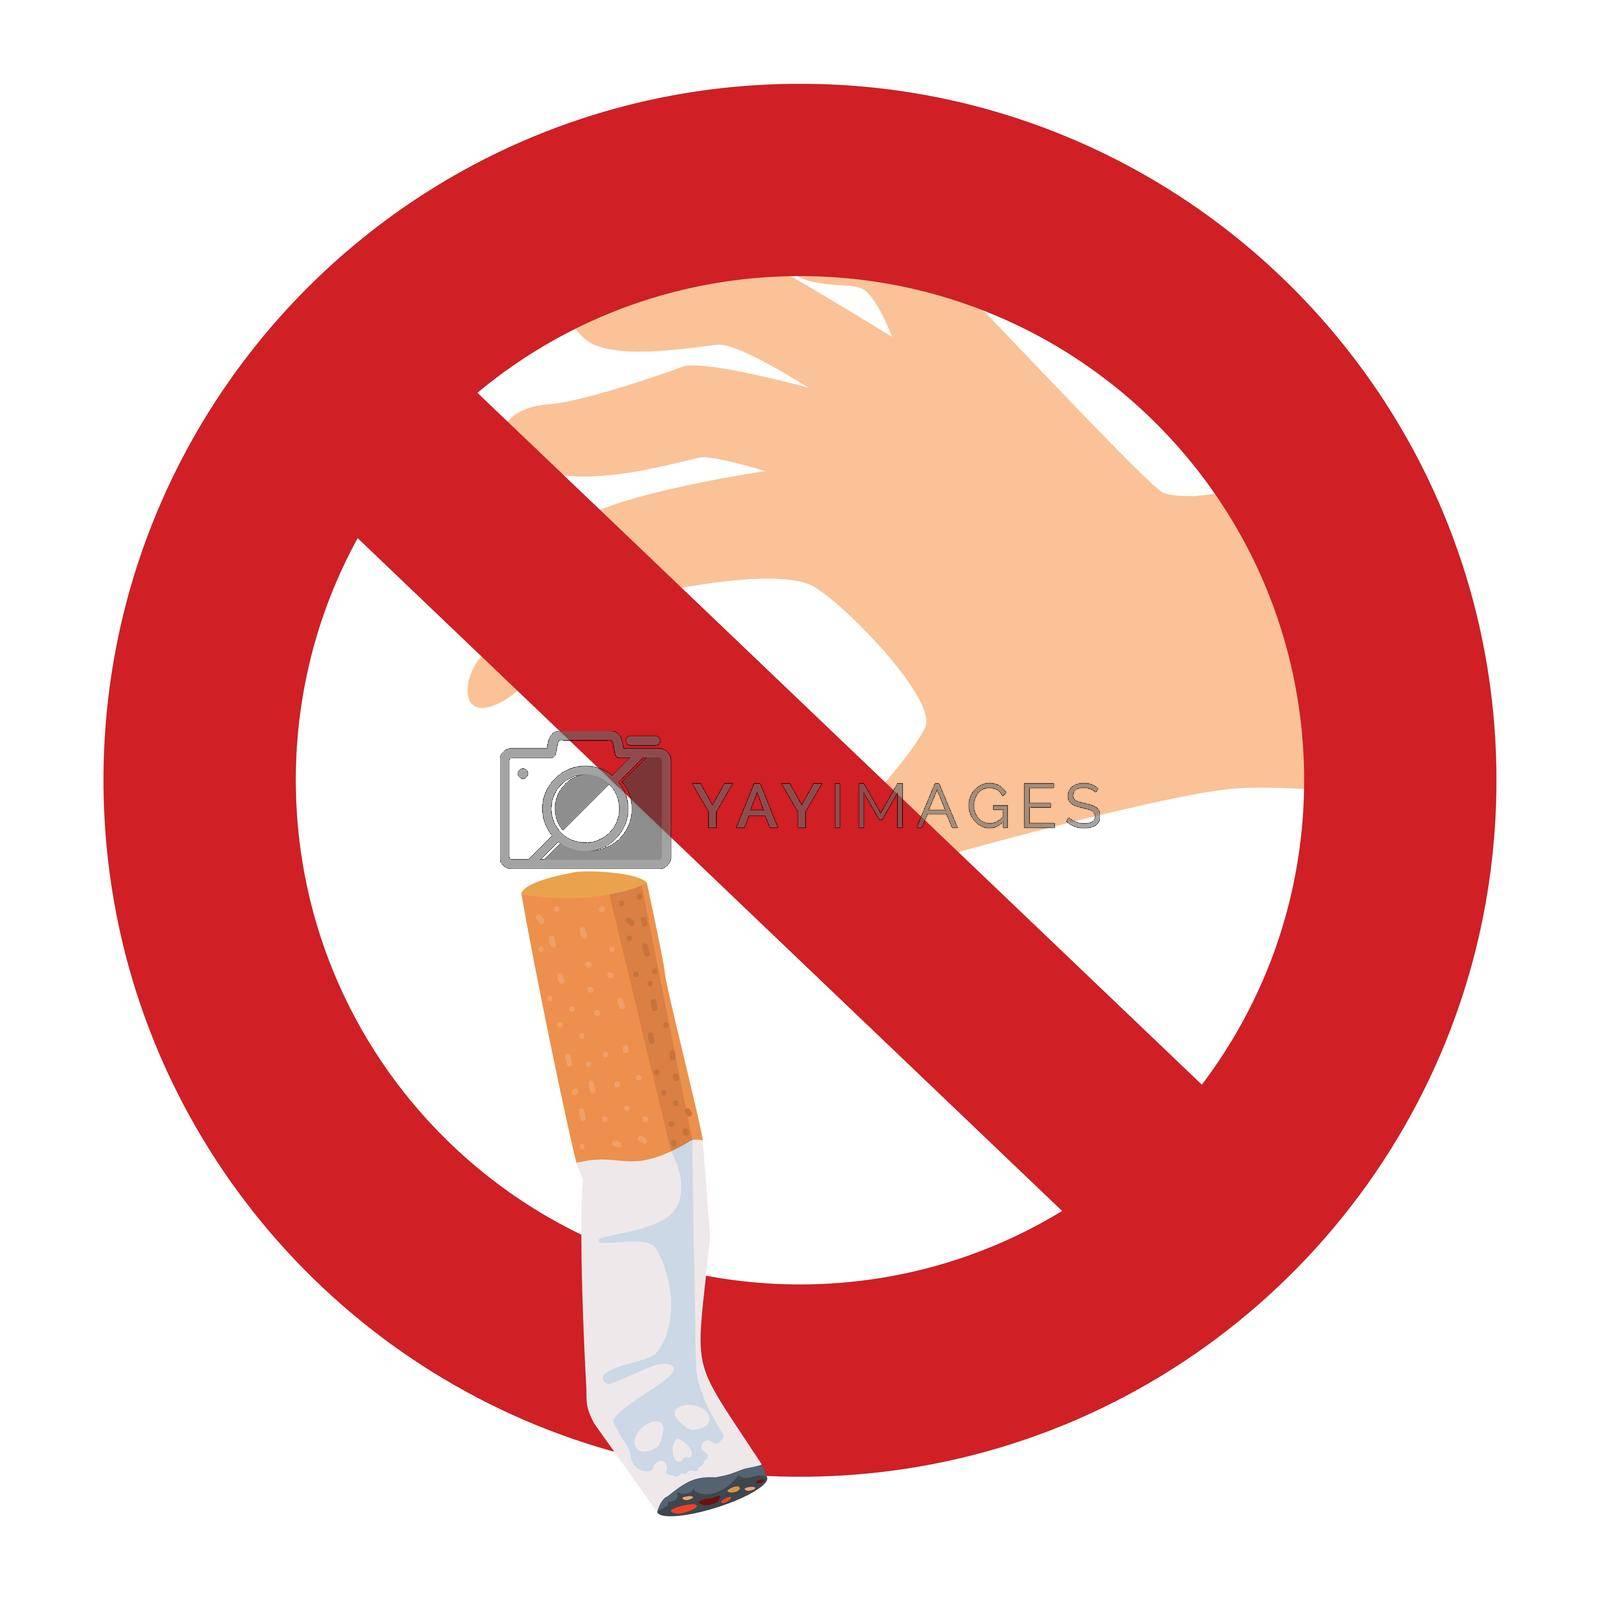 Royalty free image of Cigarette butt No Smoking Sign icon by focus_bell